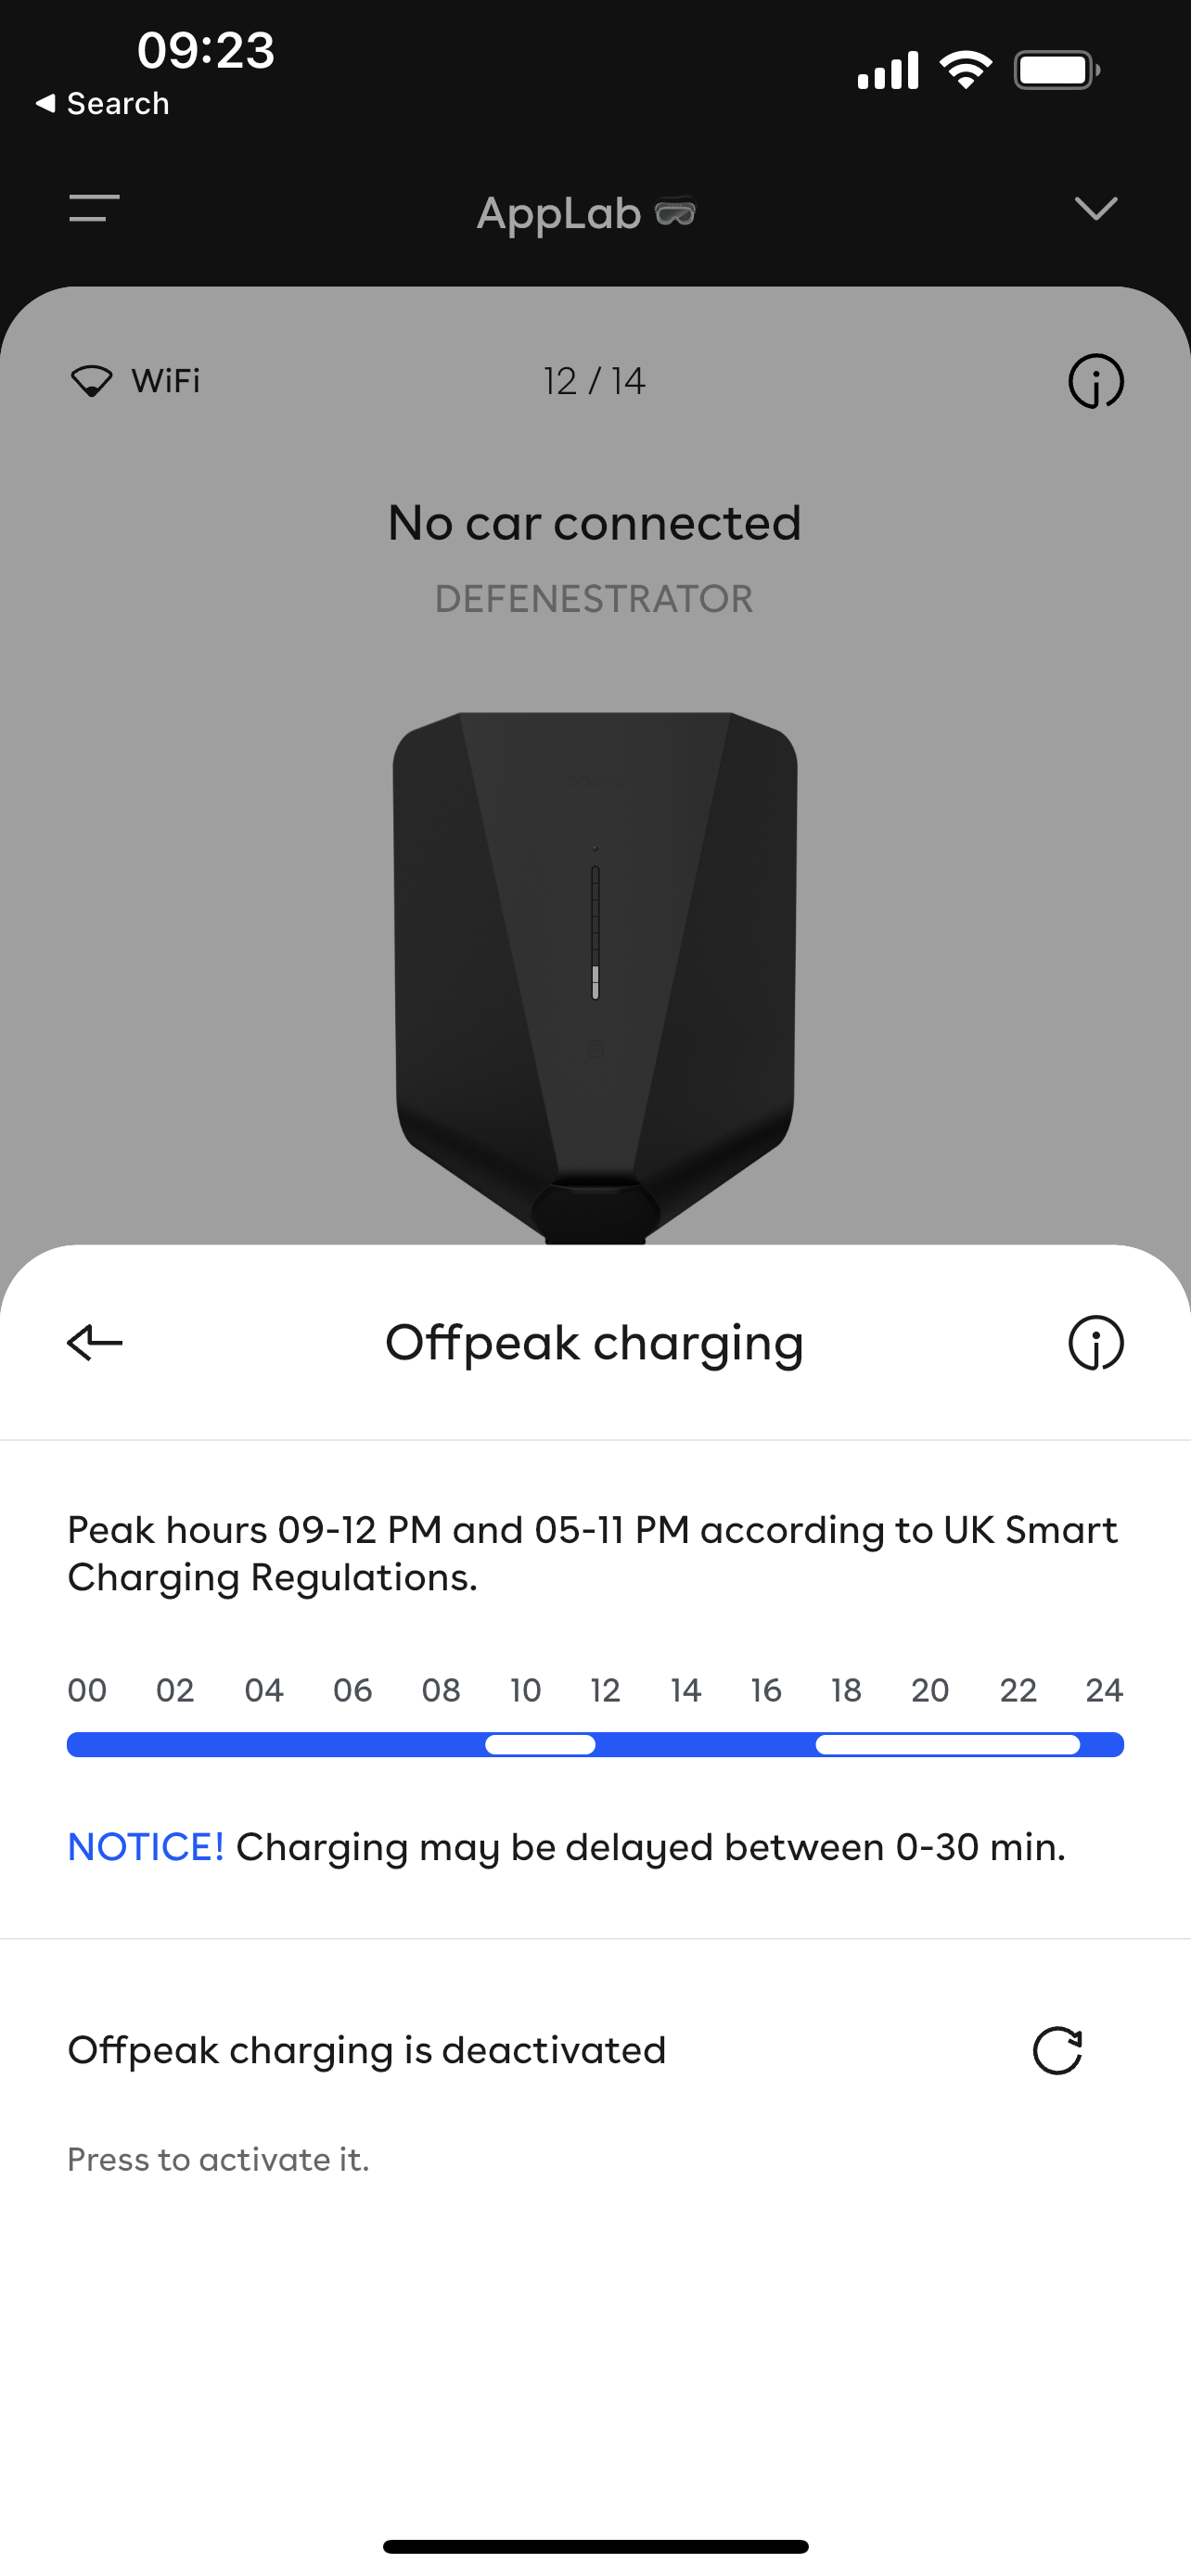 The offpeak charging tab showing that offpeak charging is deactivated.